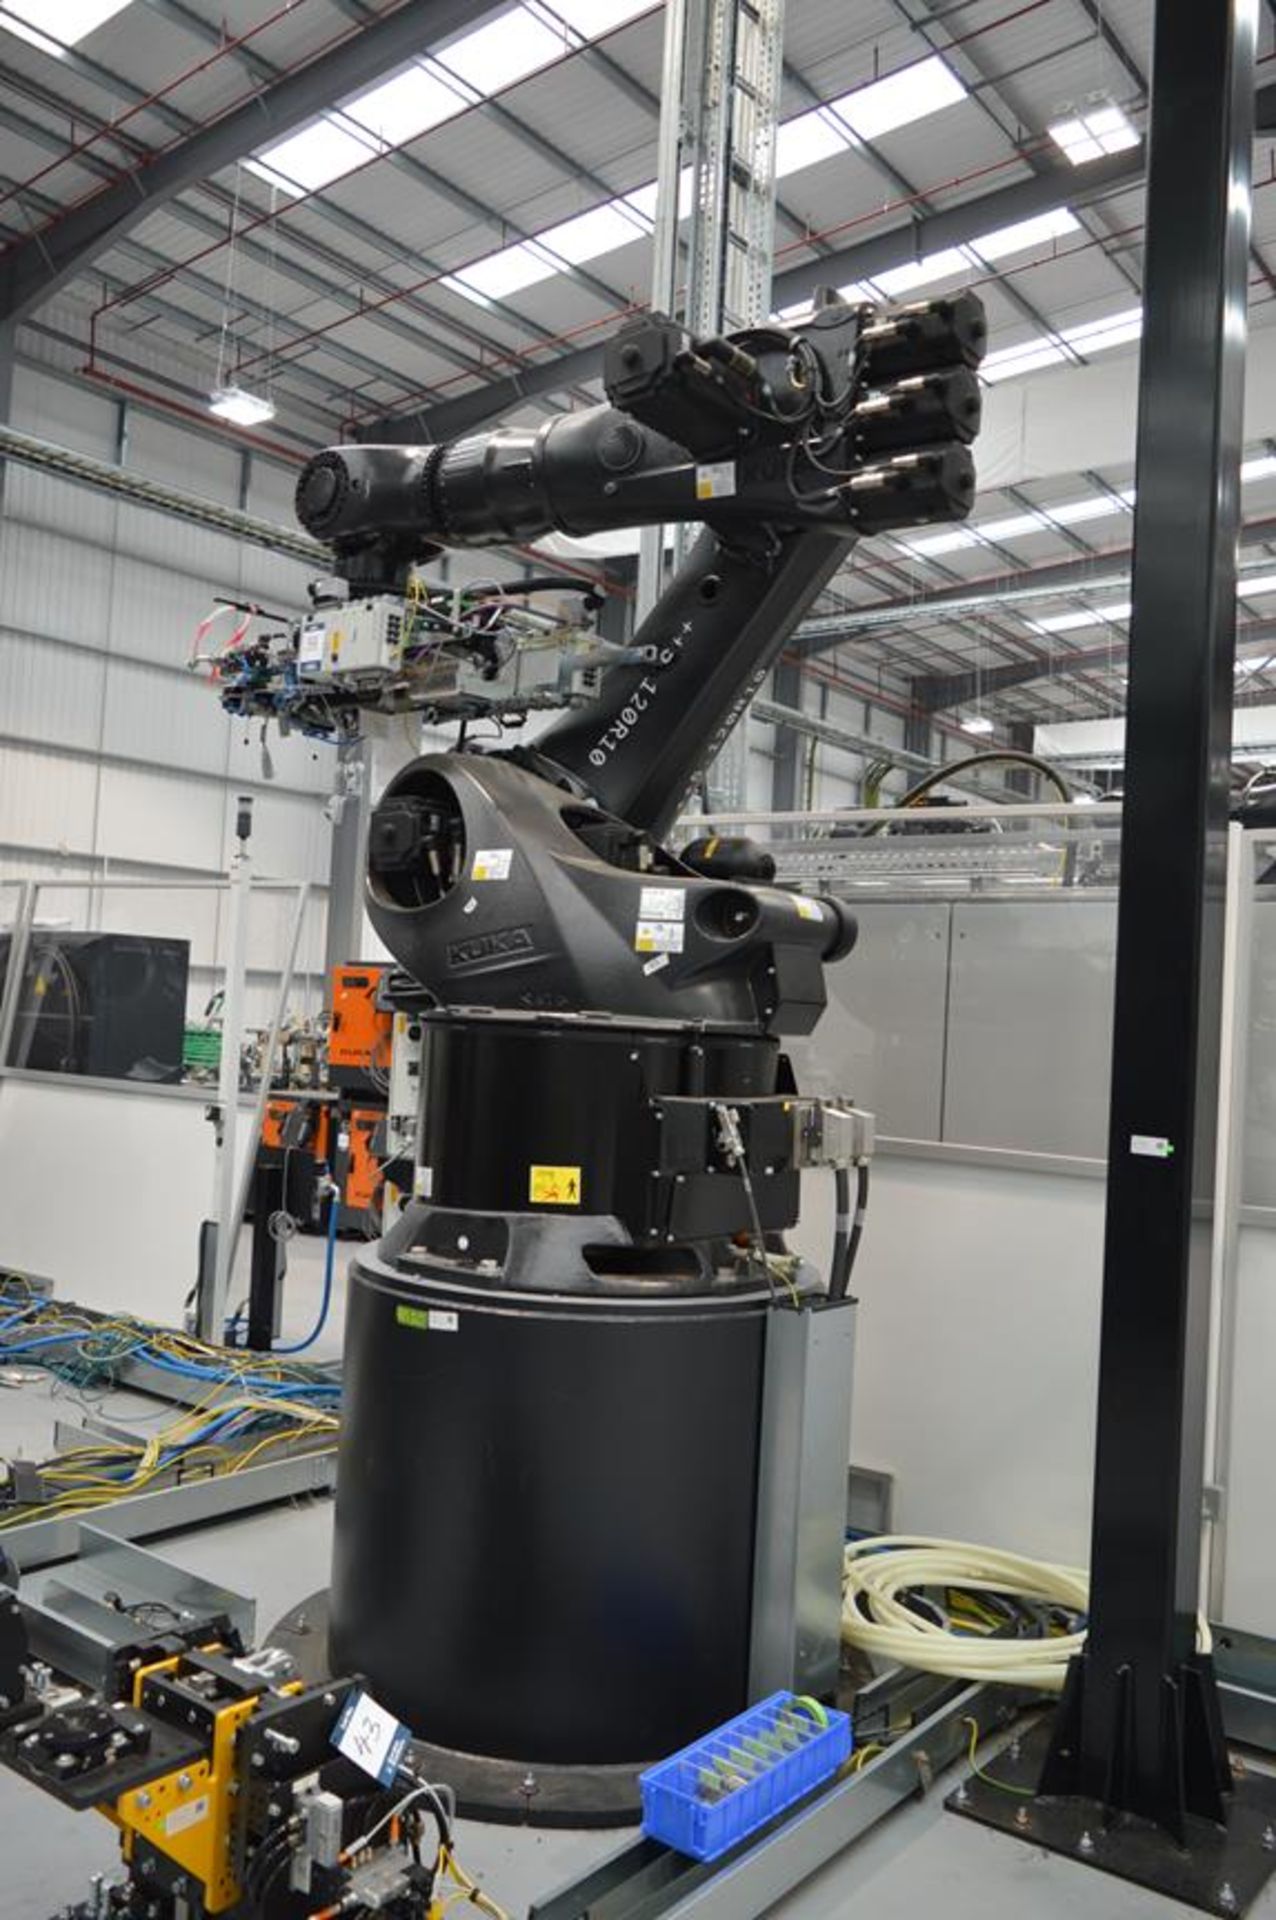 Kuka, KR280/R3080 FLR six axis robot on extended pedestal, Serial No. 4380880 (DOM: 2021) with KR C4